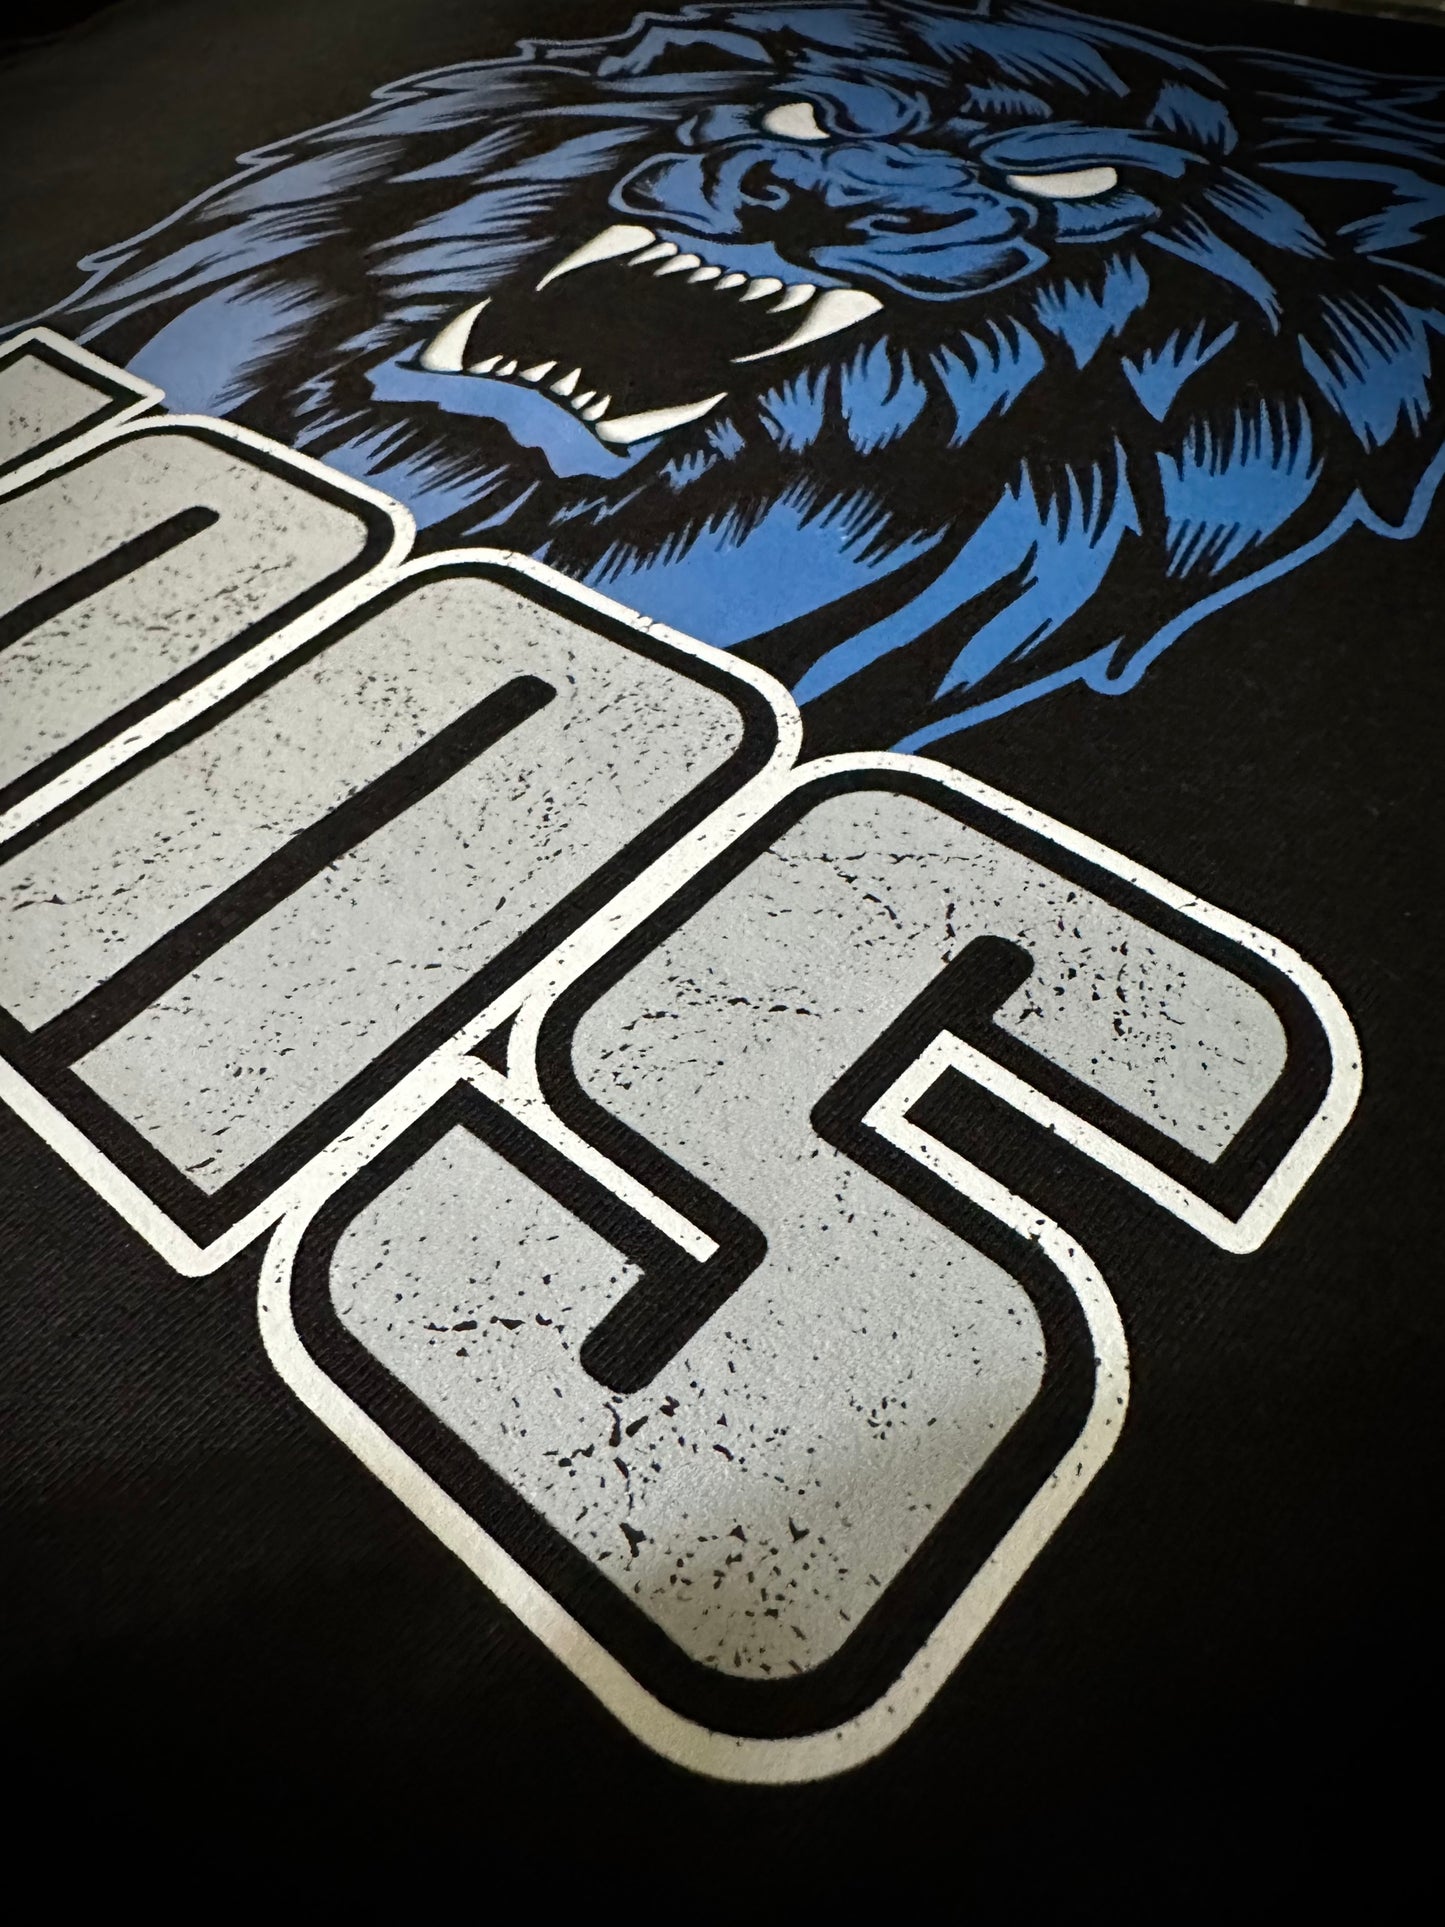 another close up view of the lions lettering